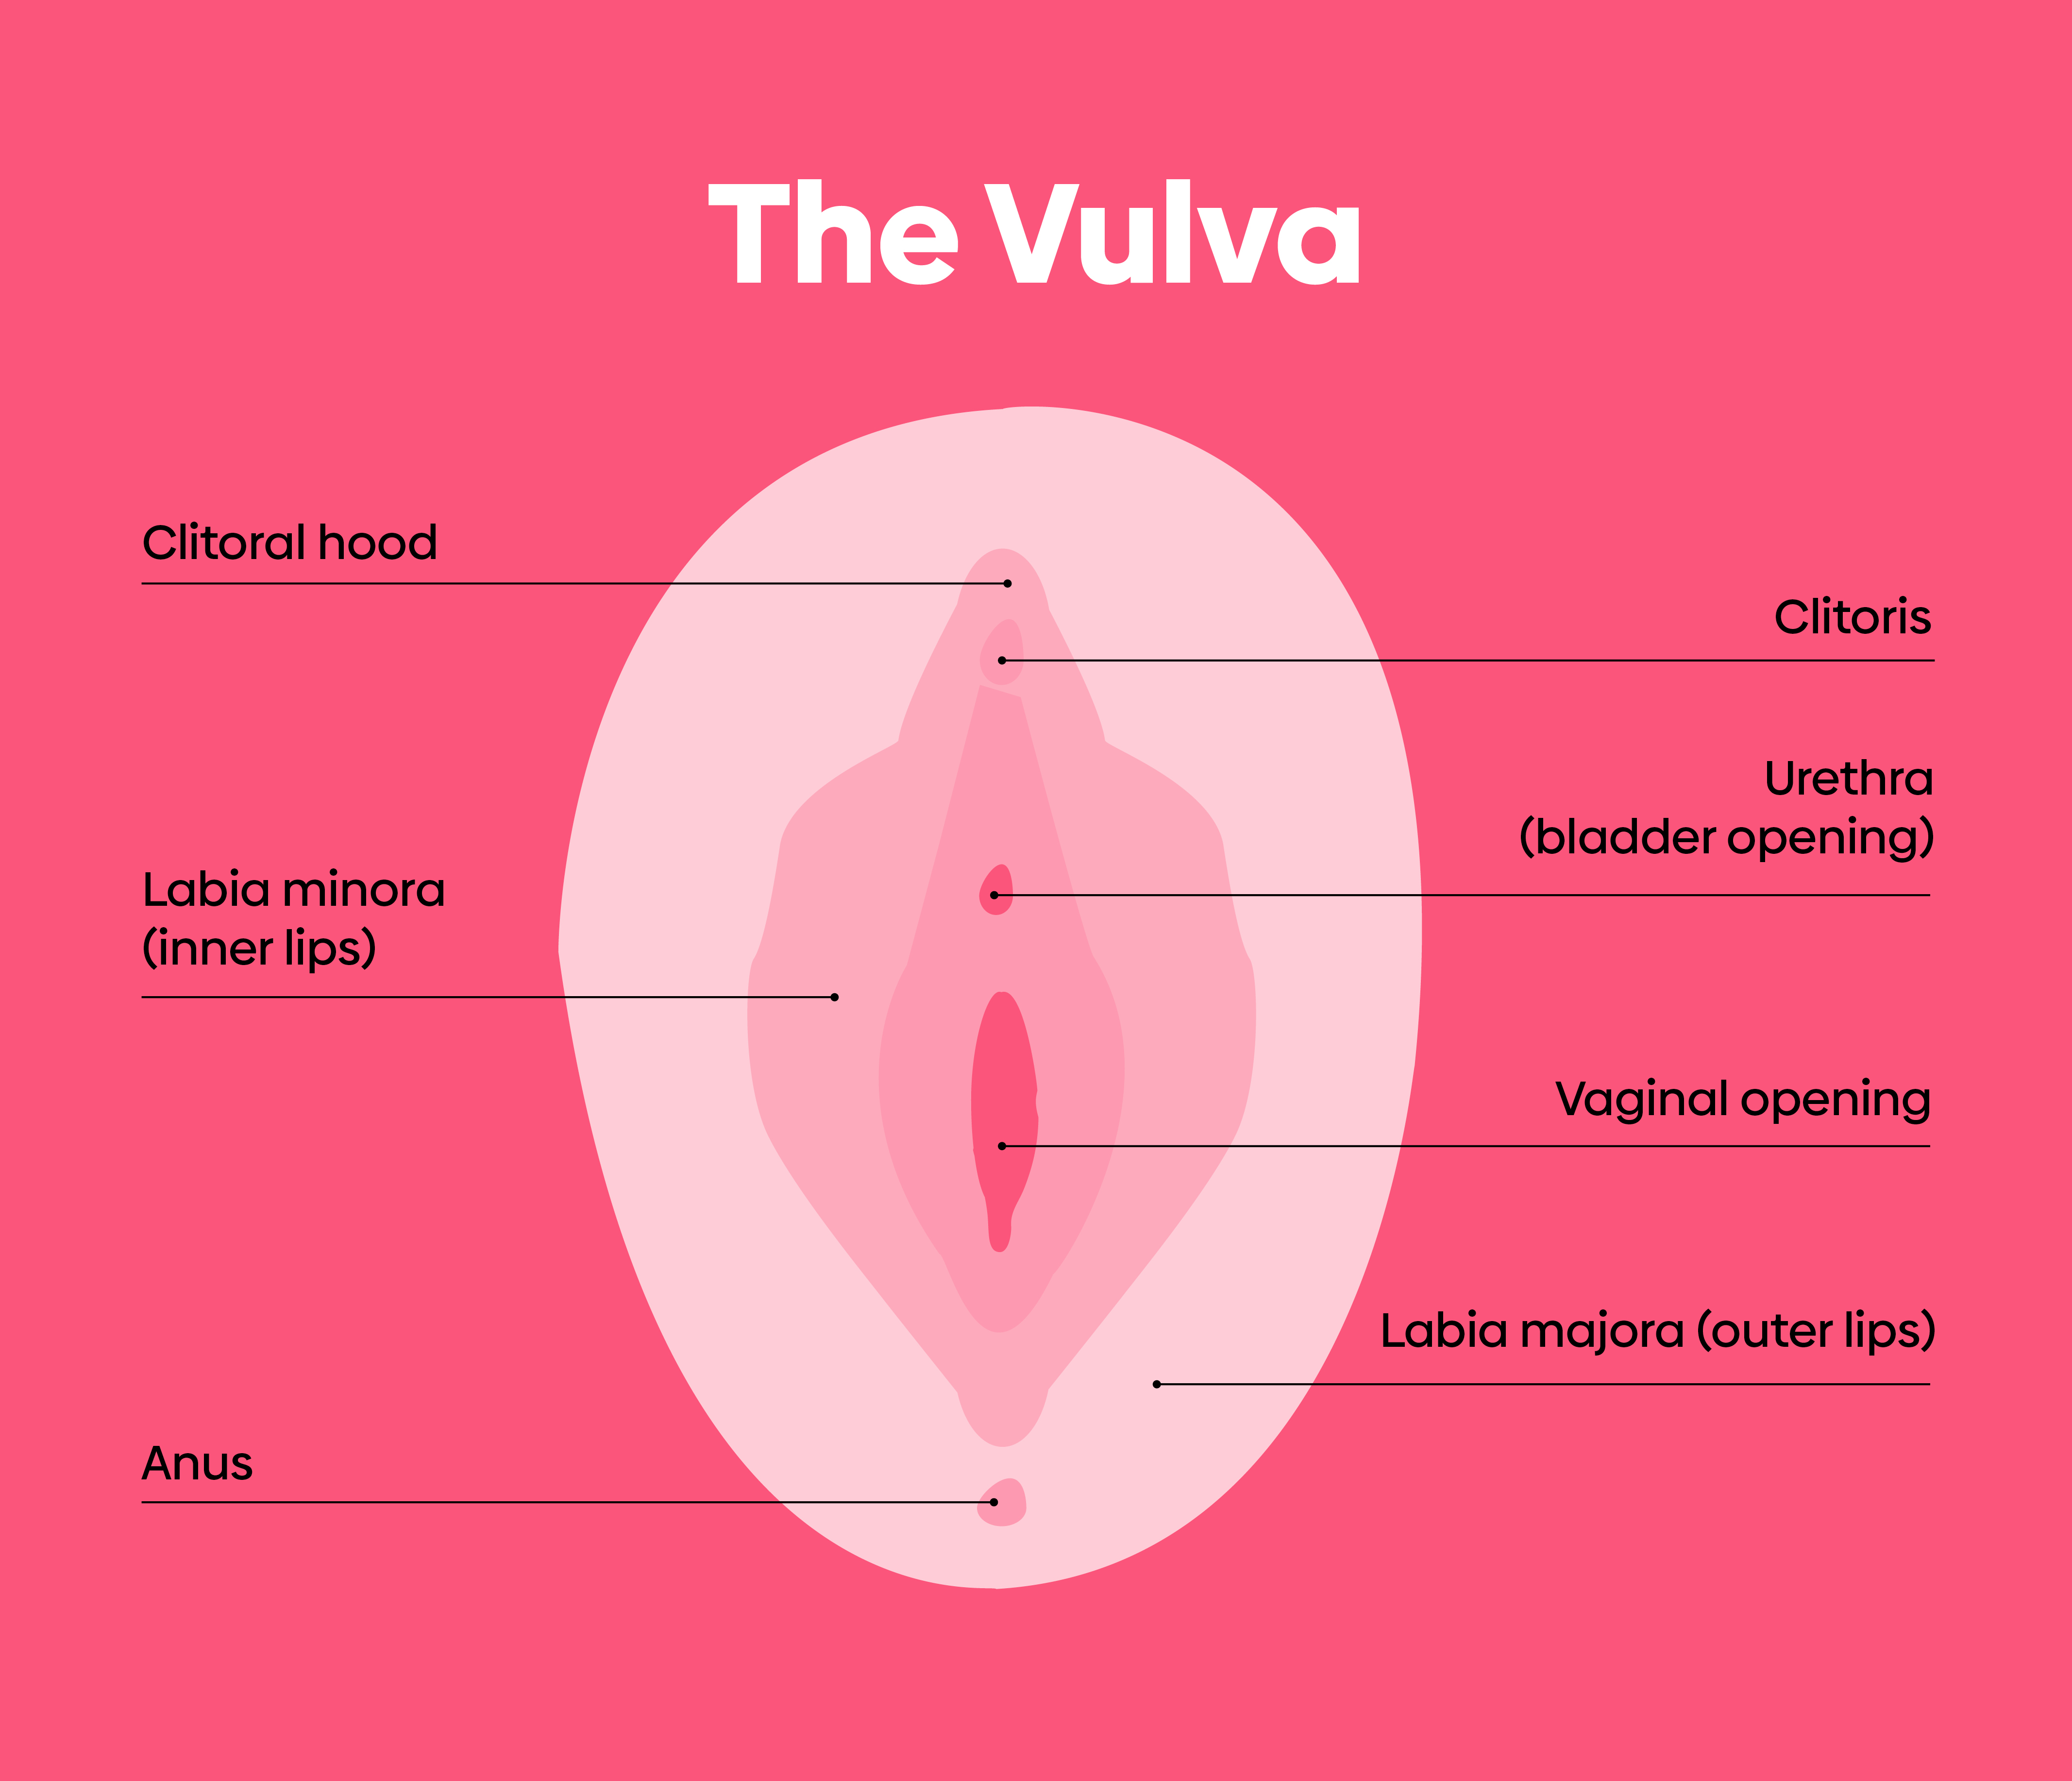 Changes in the Vagina and Vulva, Sexual Side Effects of Menopause